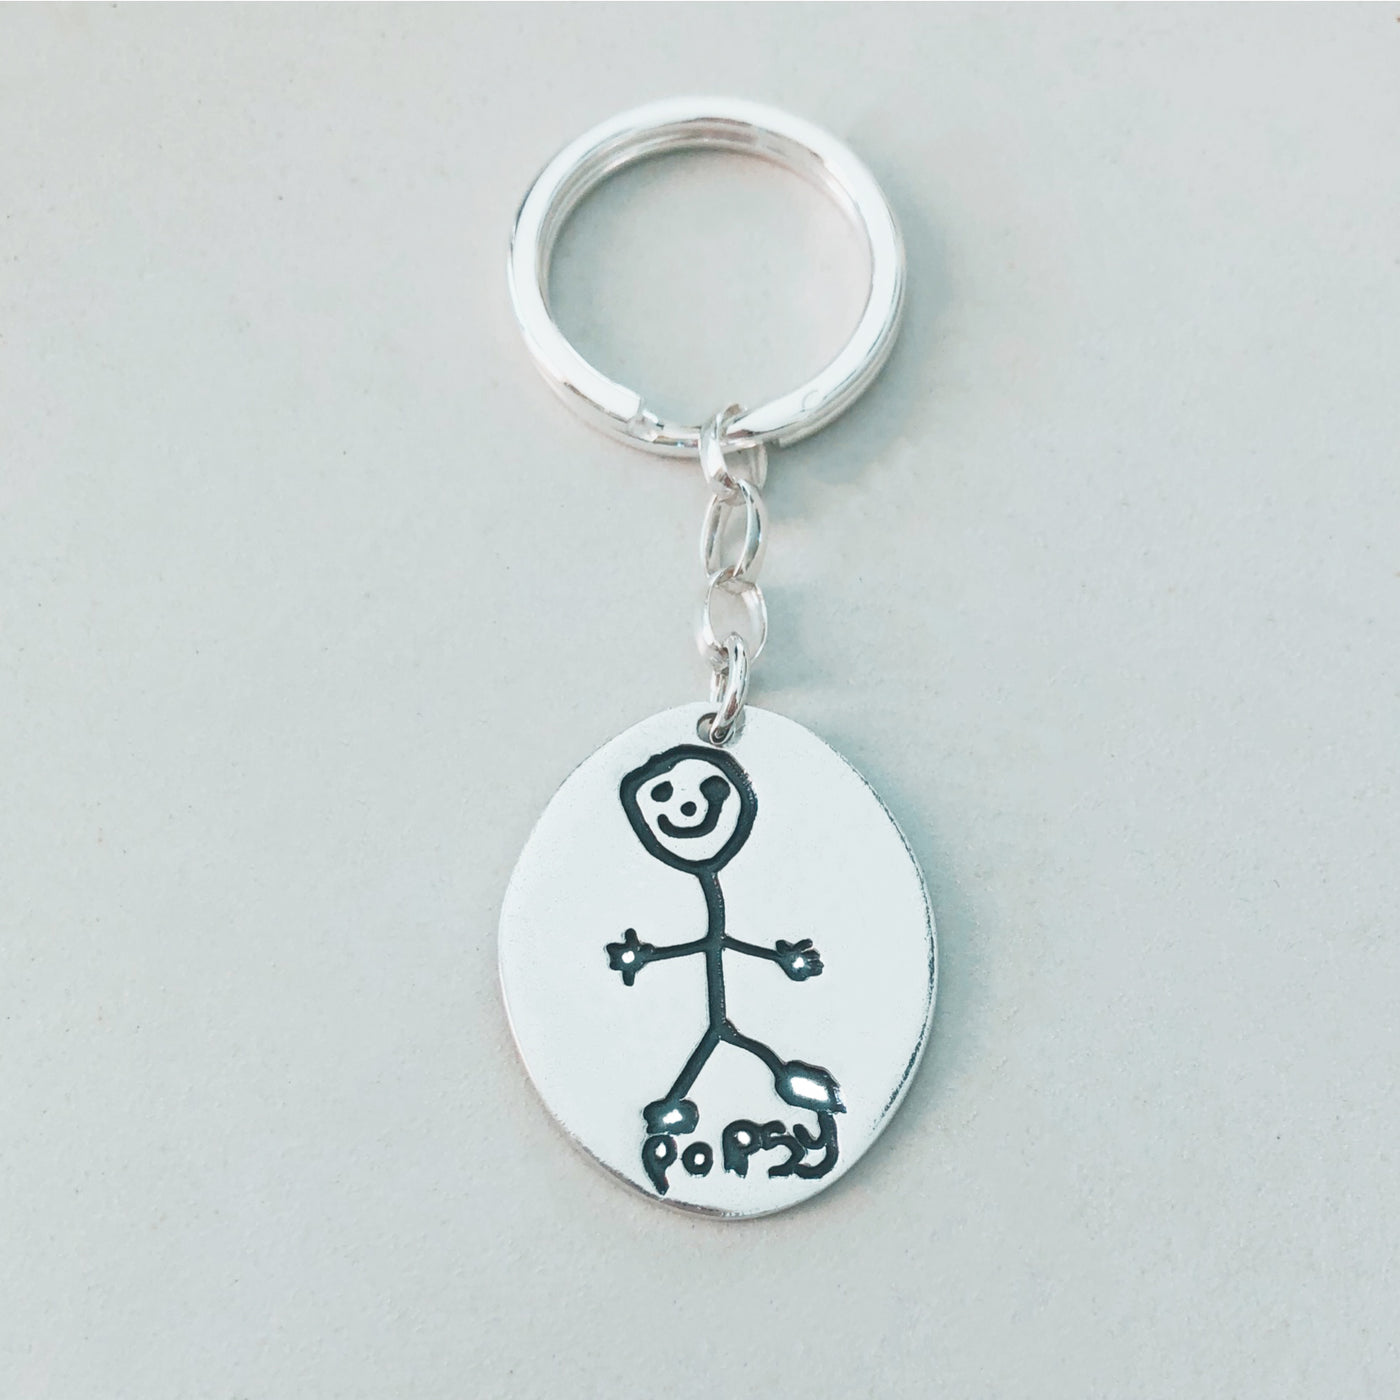 PERSONALIZED CHILDRENS ARTWORK KEYCHAIN | forever imprint jewellery